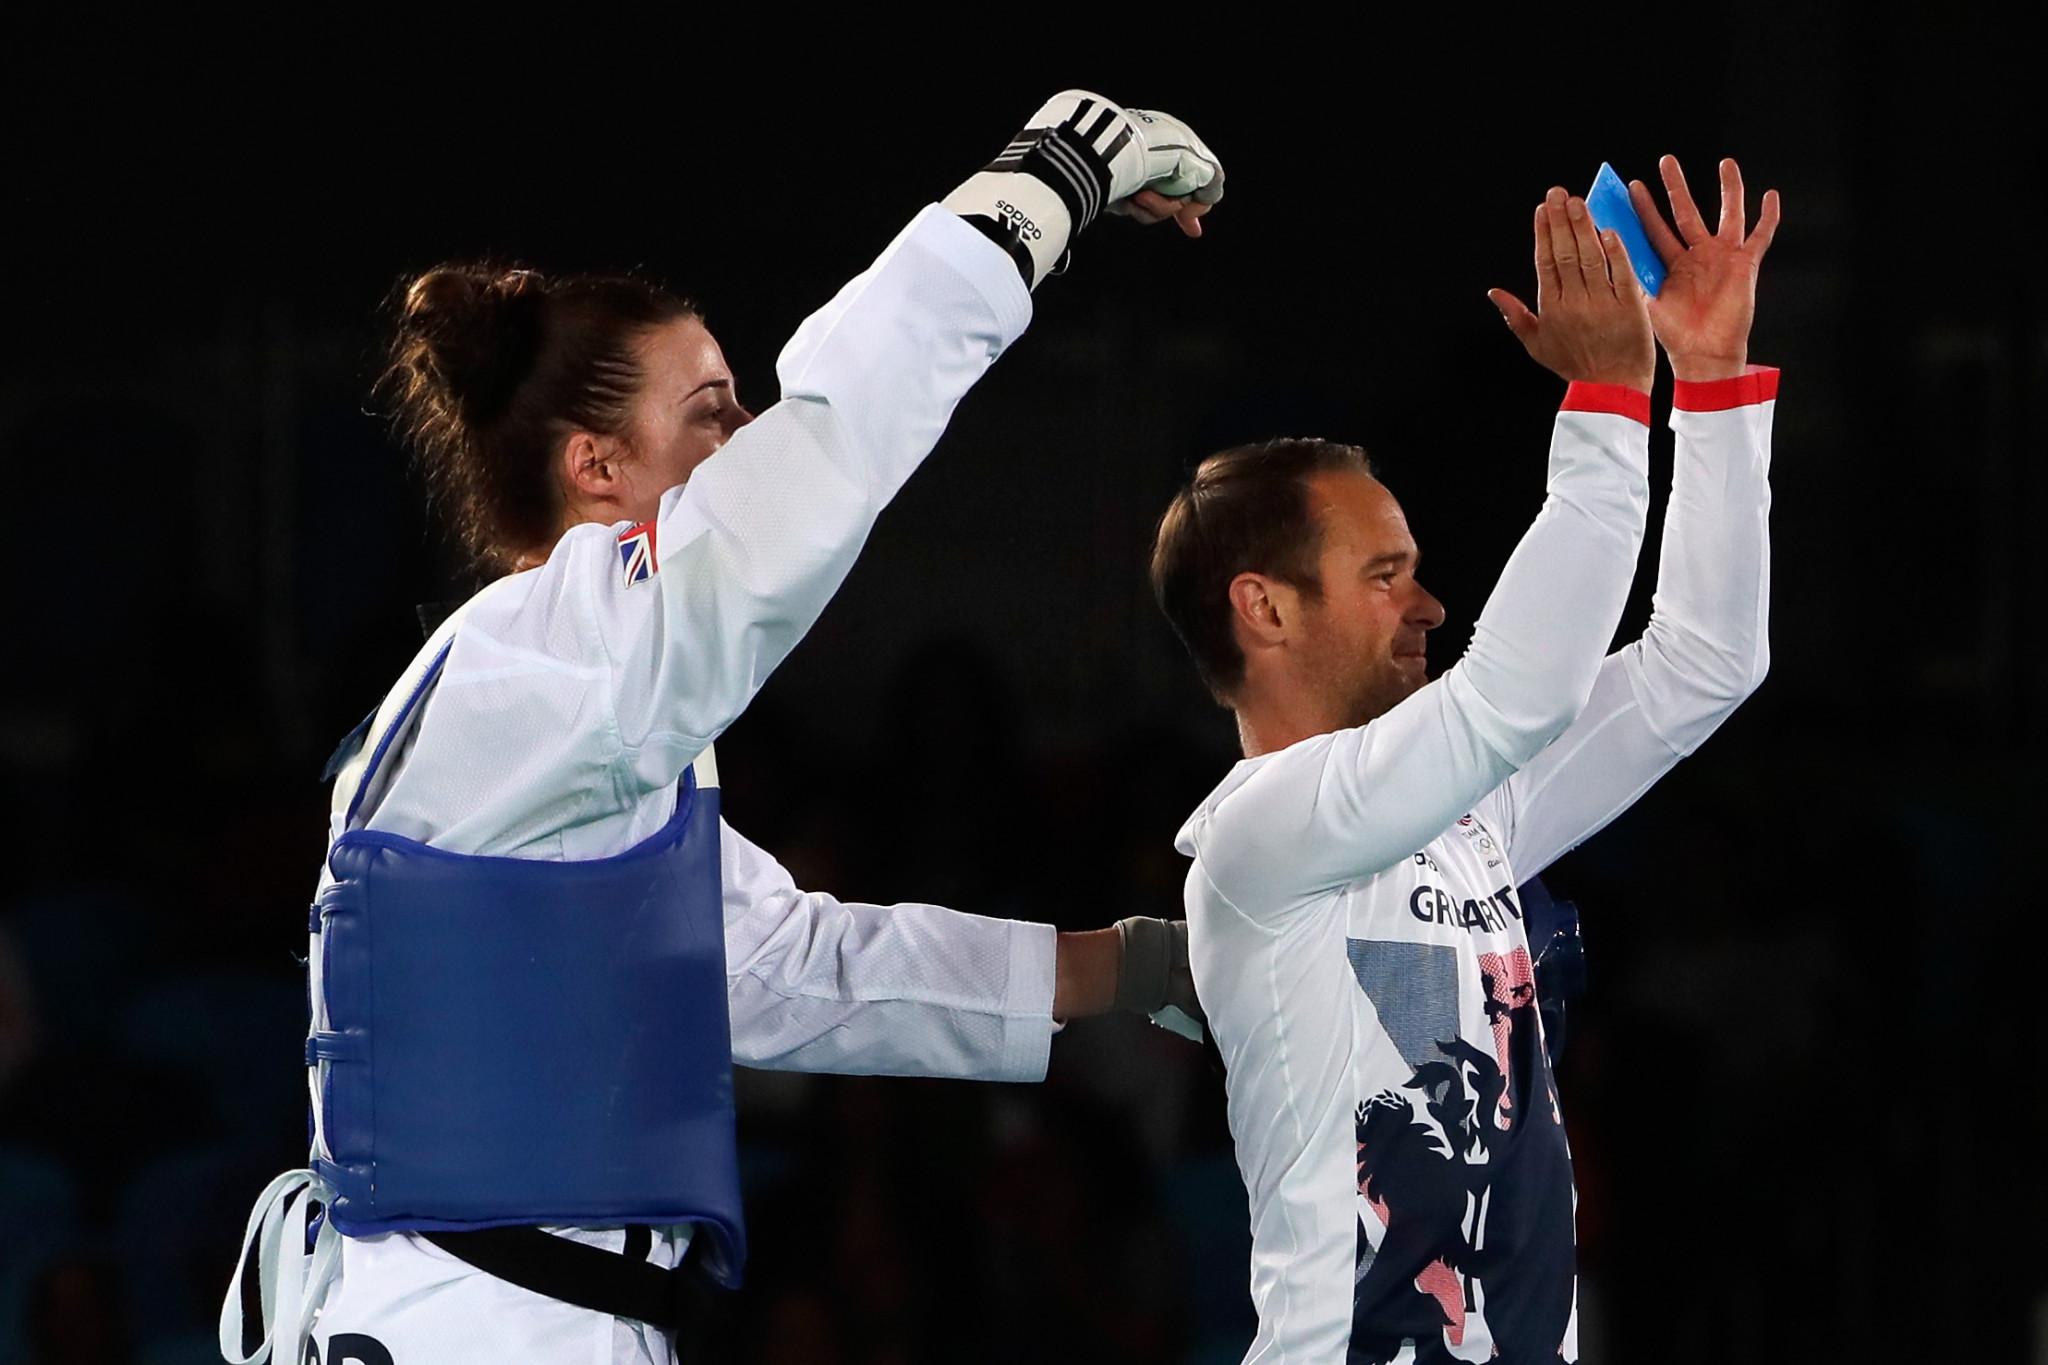 Paul Green, who has coached Britain's Jade Jones to two Olympic gold medals, will now be tasked with helping to boost American fortunes in the build-up to Tokyo 2020 and beyond ©Getty Images